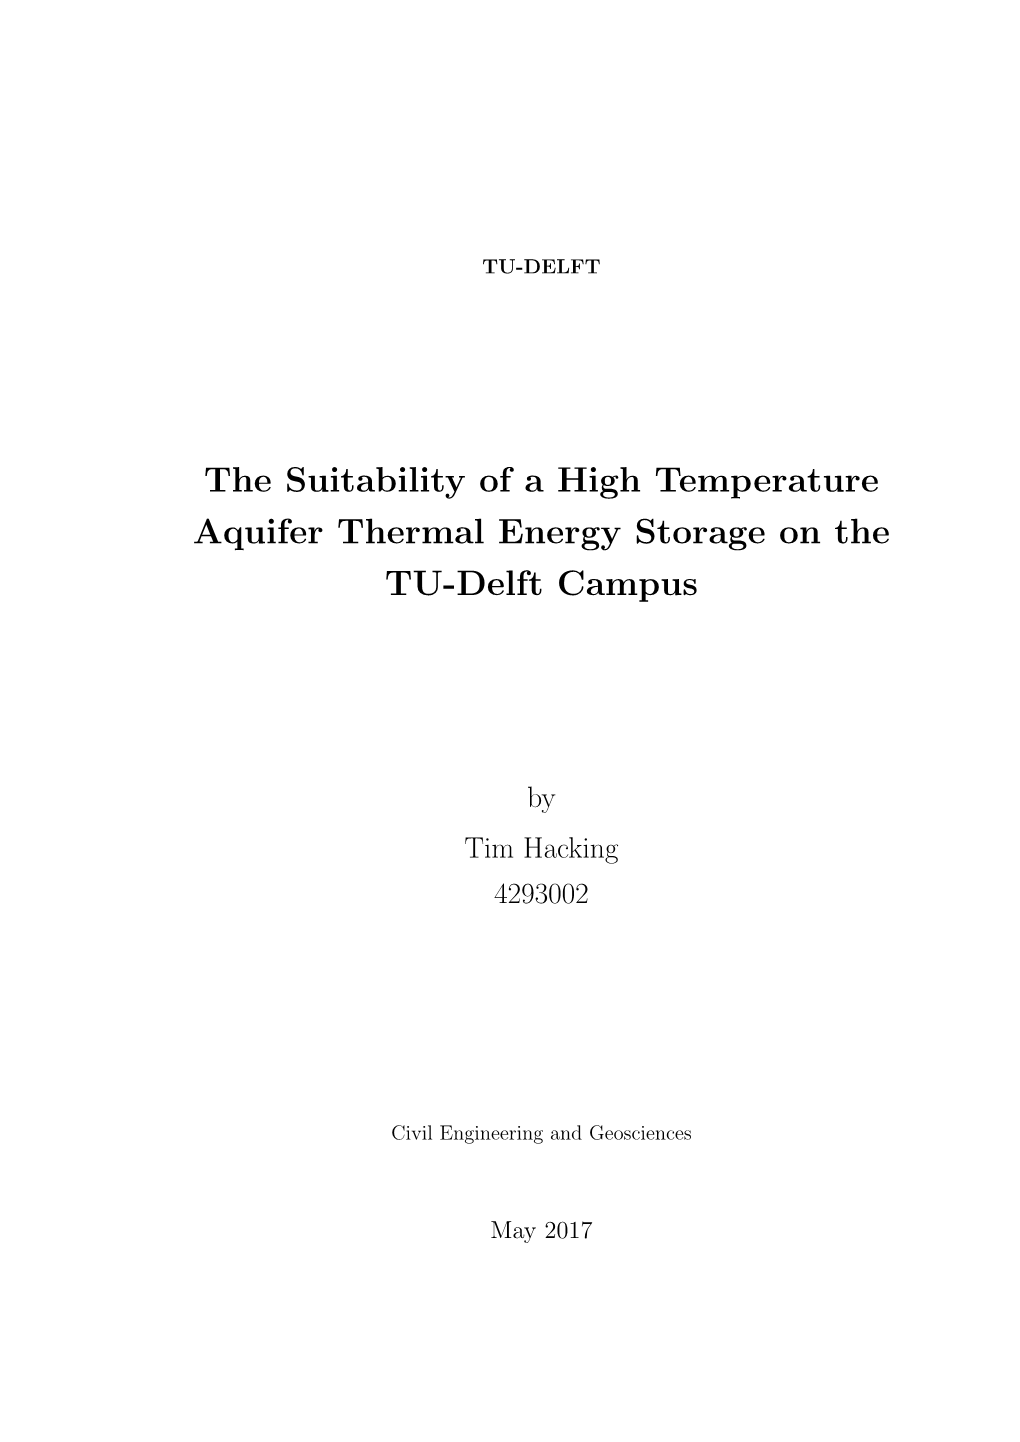 The Suitability of a High Temperature Aquifer Thermal Energy Storage on the TU-Delft Campus